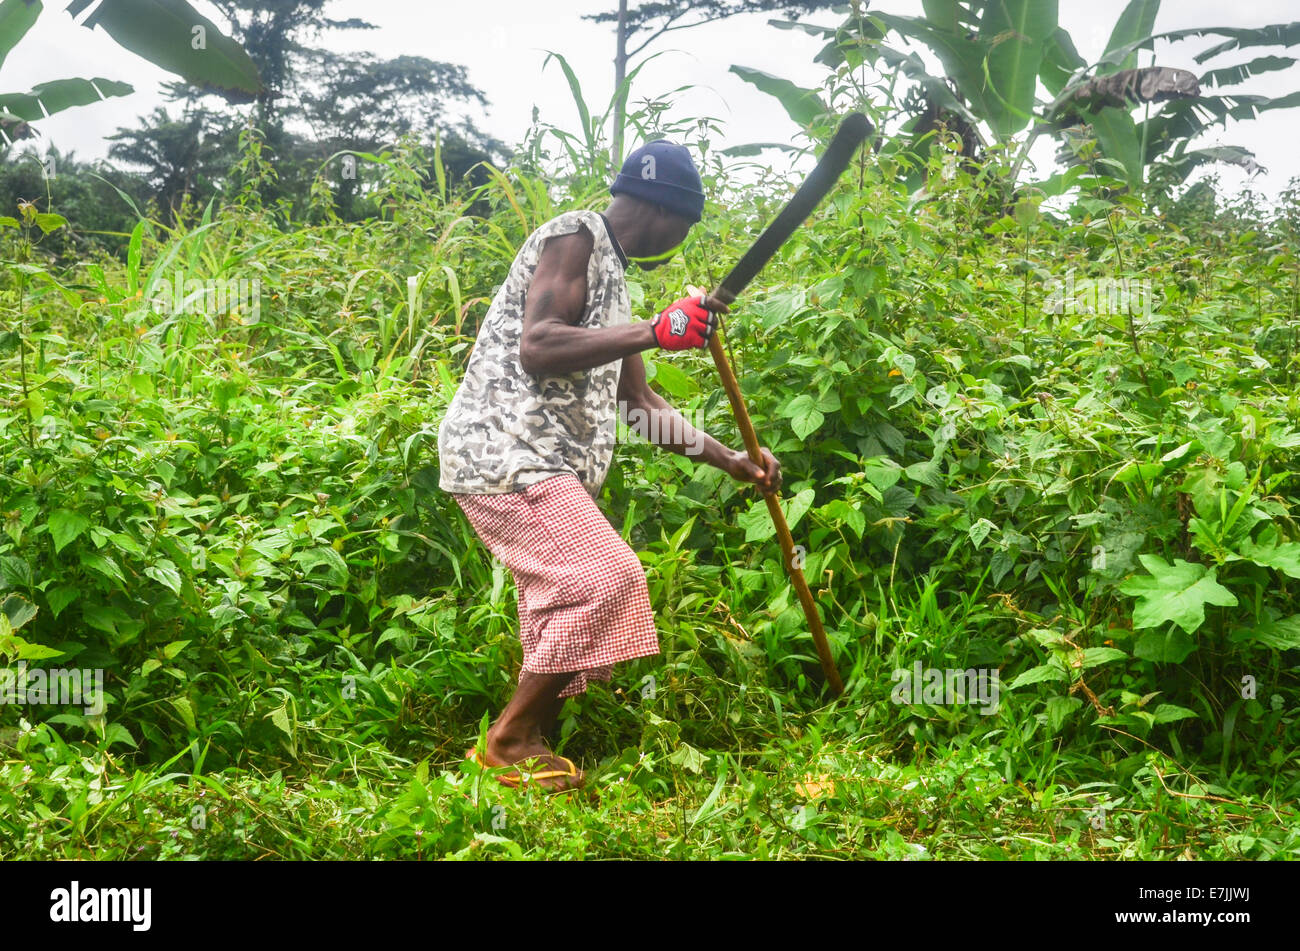 Liberian man land clearing grass with a machete in northern Liberia Stock Photo